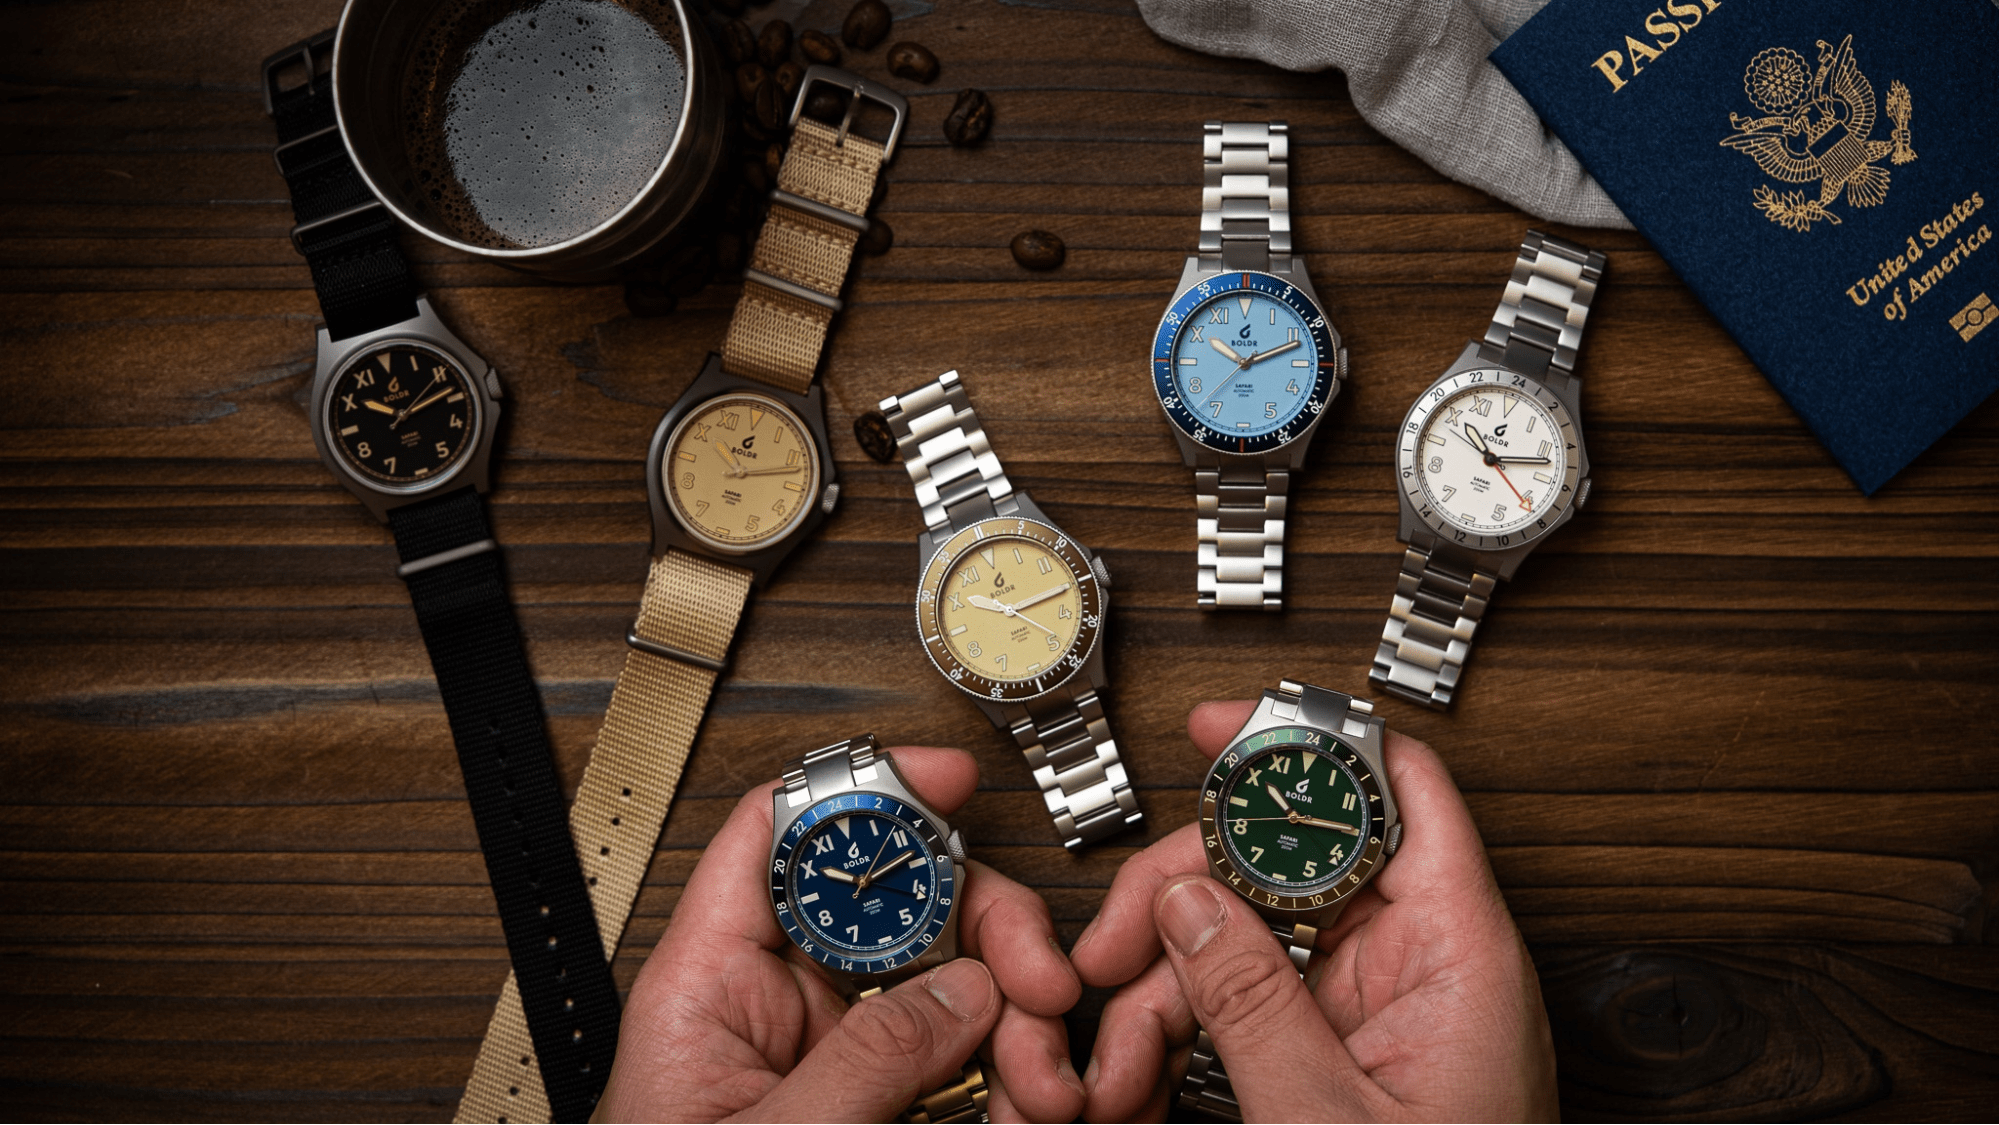 boldr supply co watches